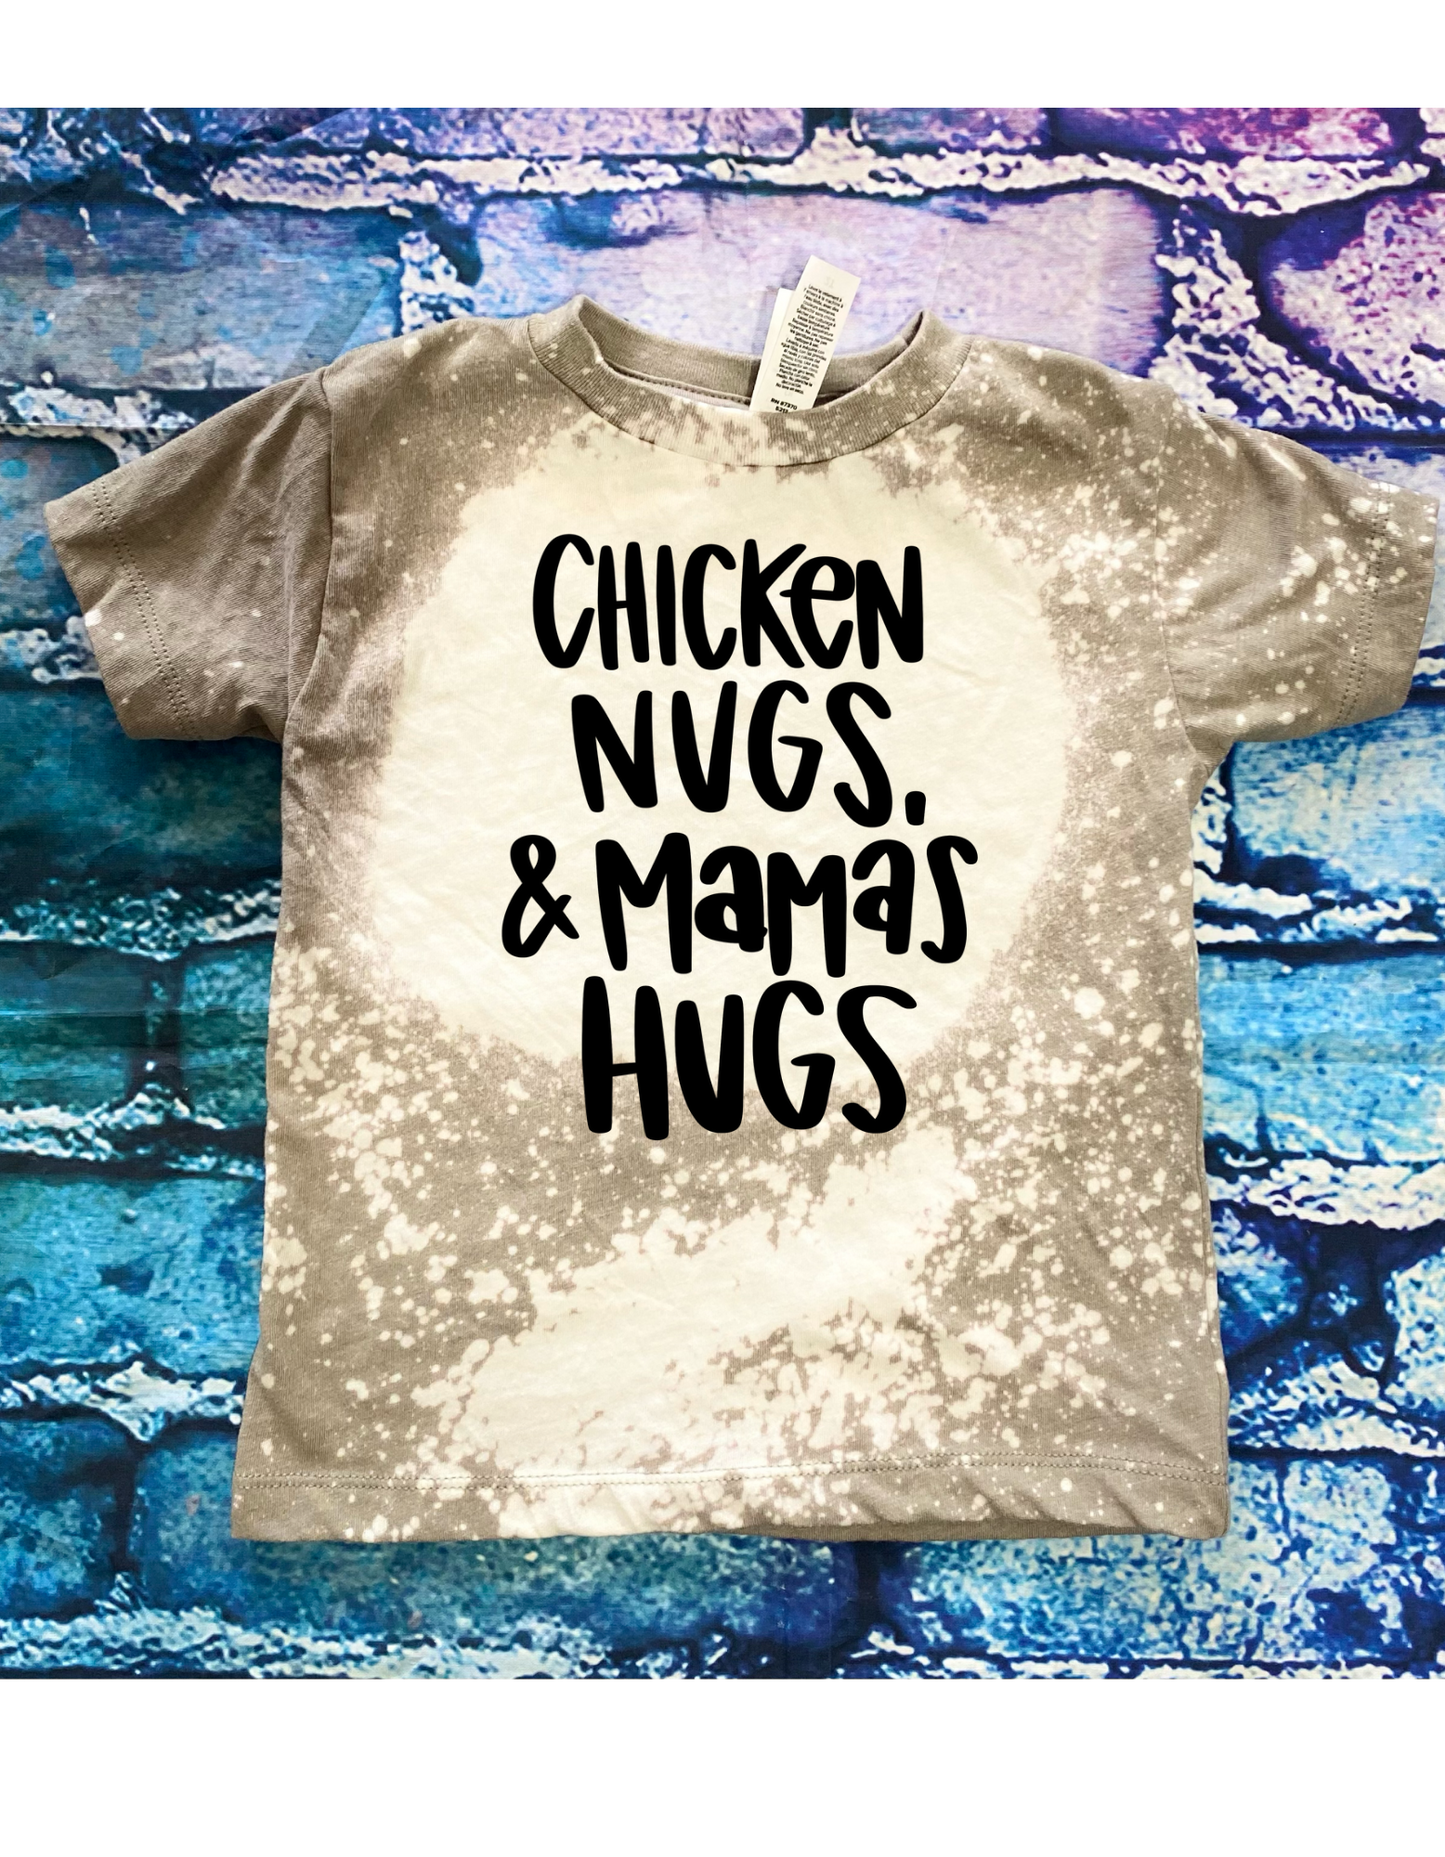 Chicken nugs and mamas hugs bleached tee - 4 little hearts